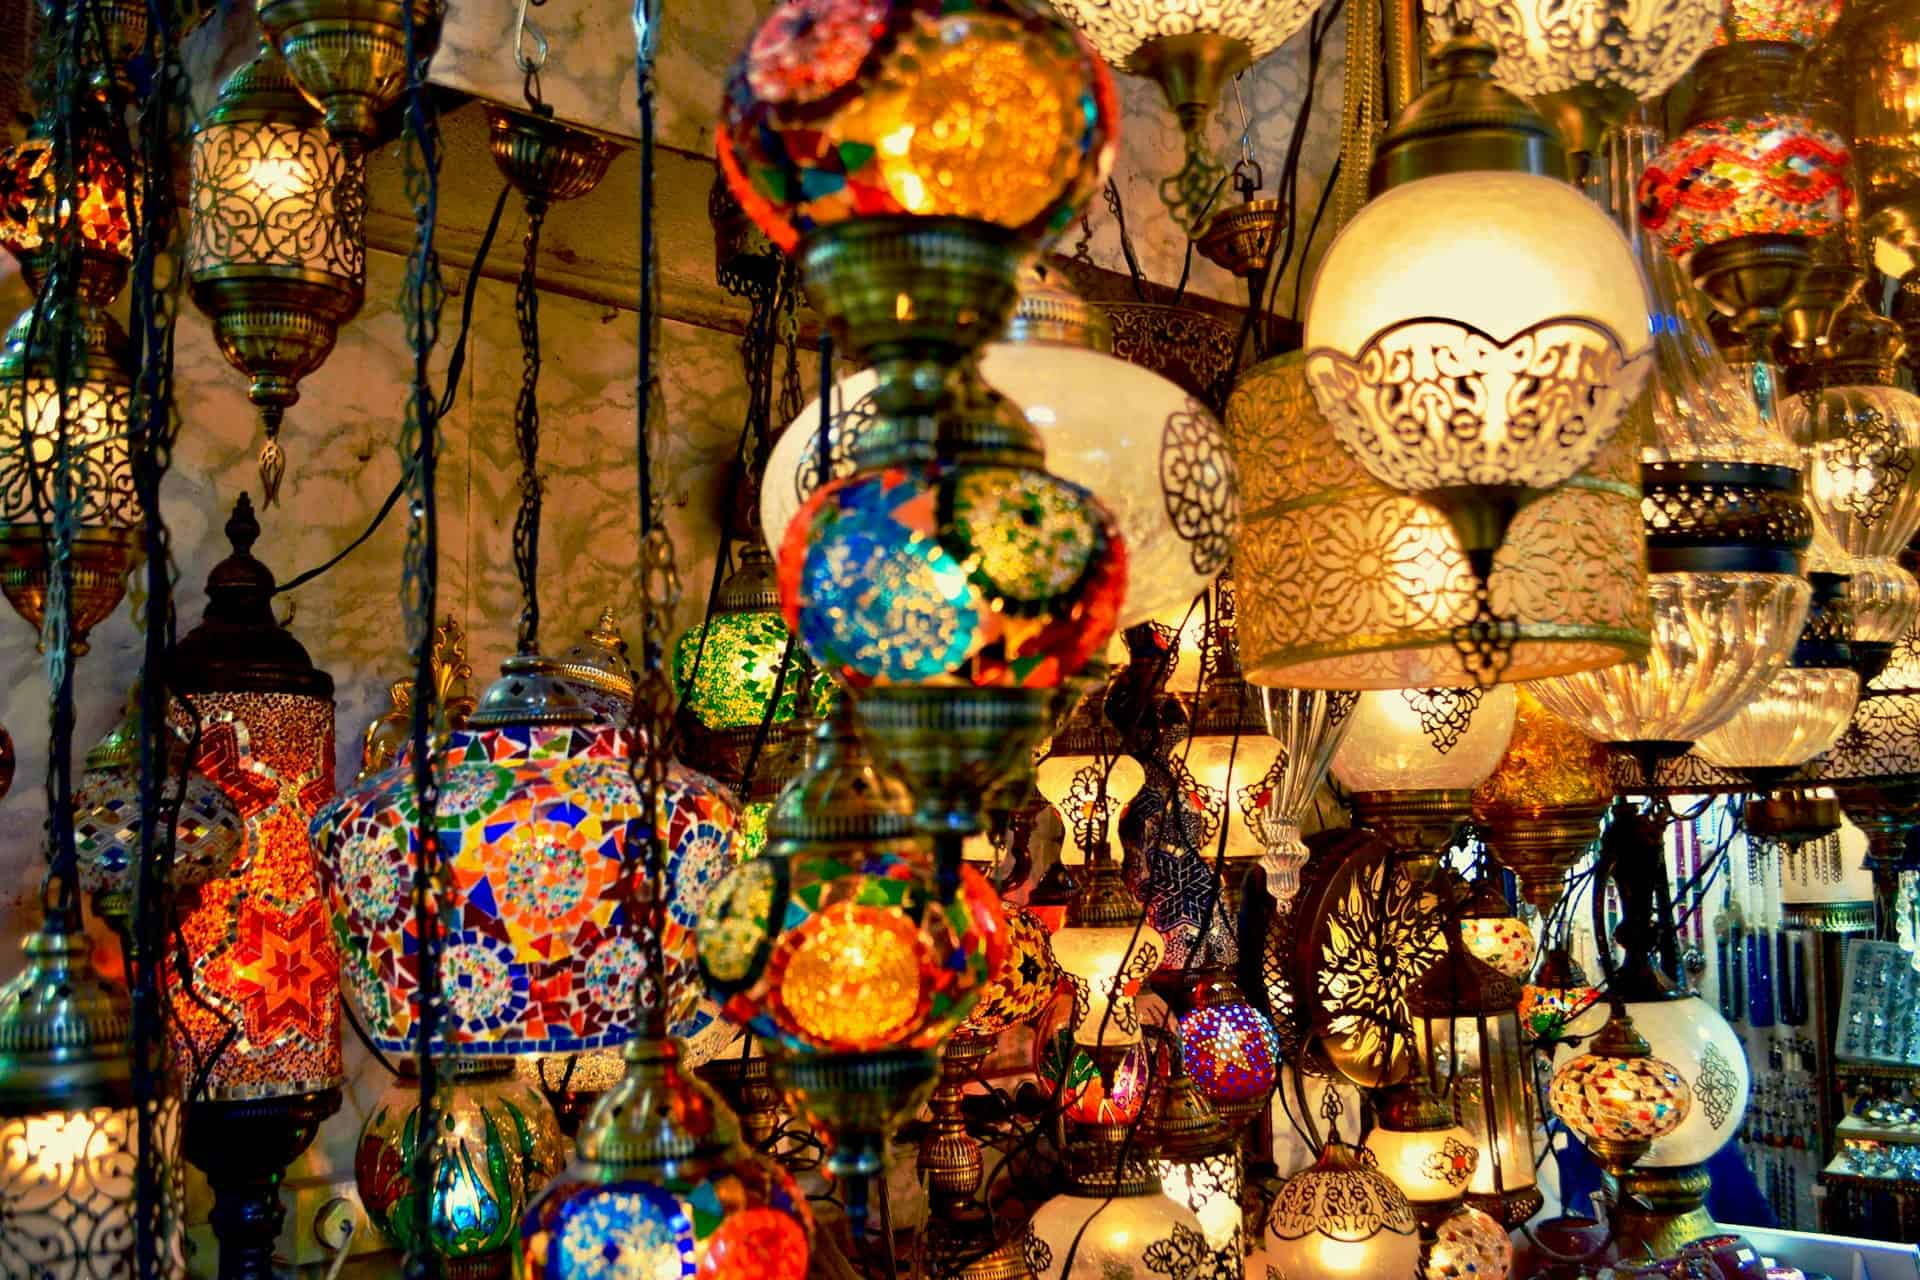 Best things to do in Istanbul Turkey - Pinar Tarhan - Colorful lamps in the shops of the Old Bazaar by riddywankenobi on Unsplash